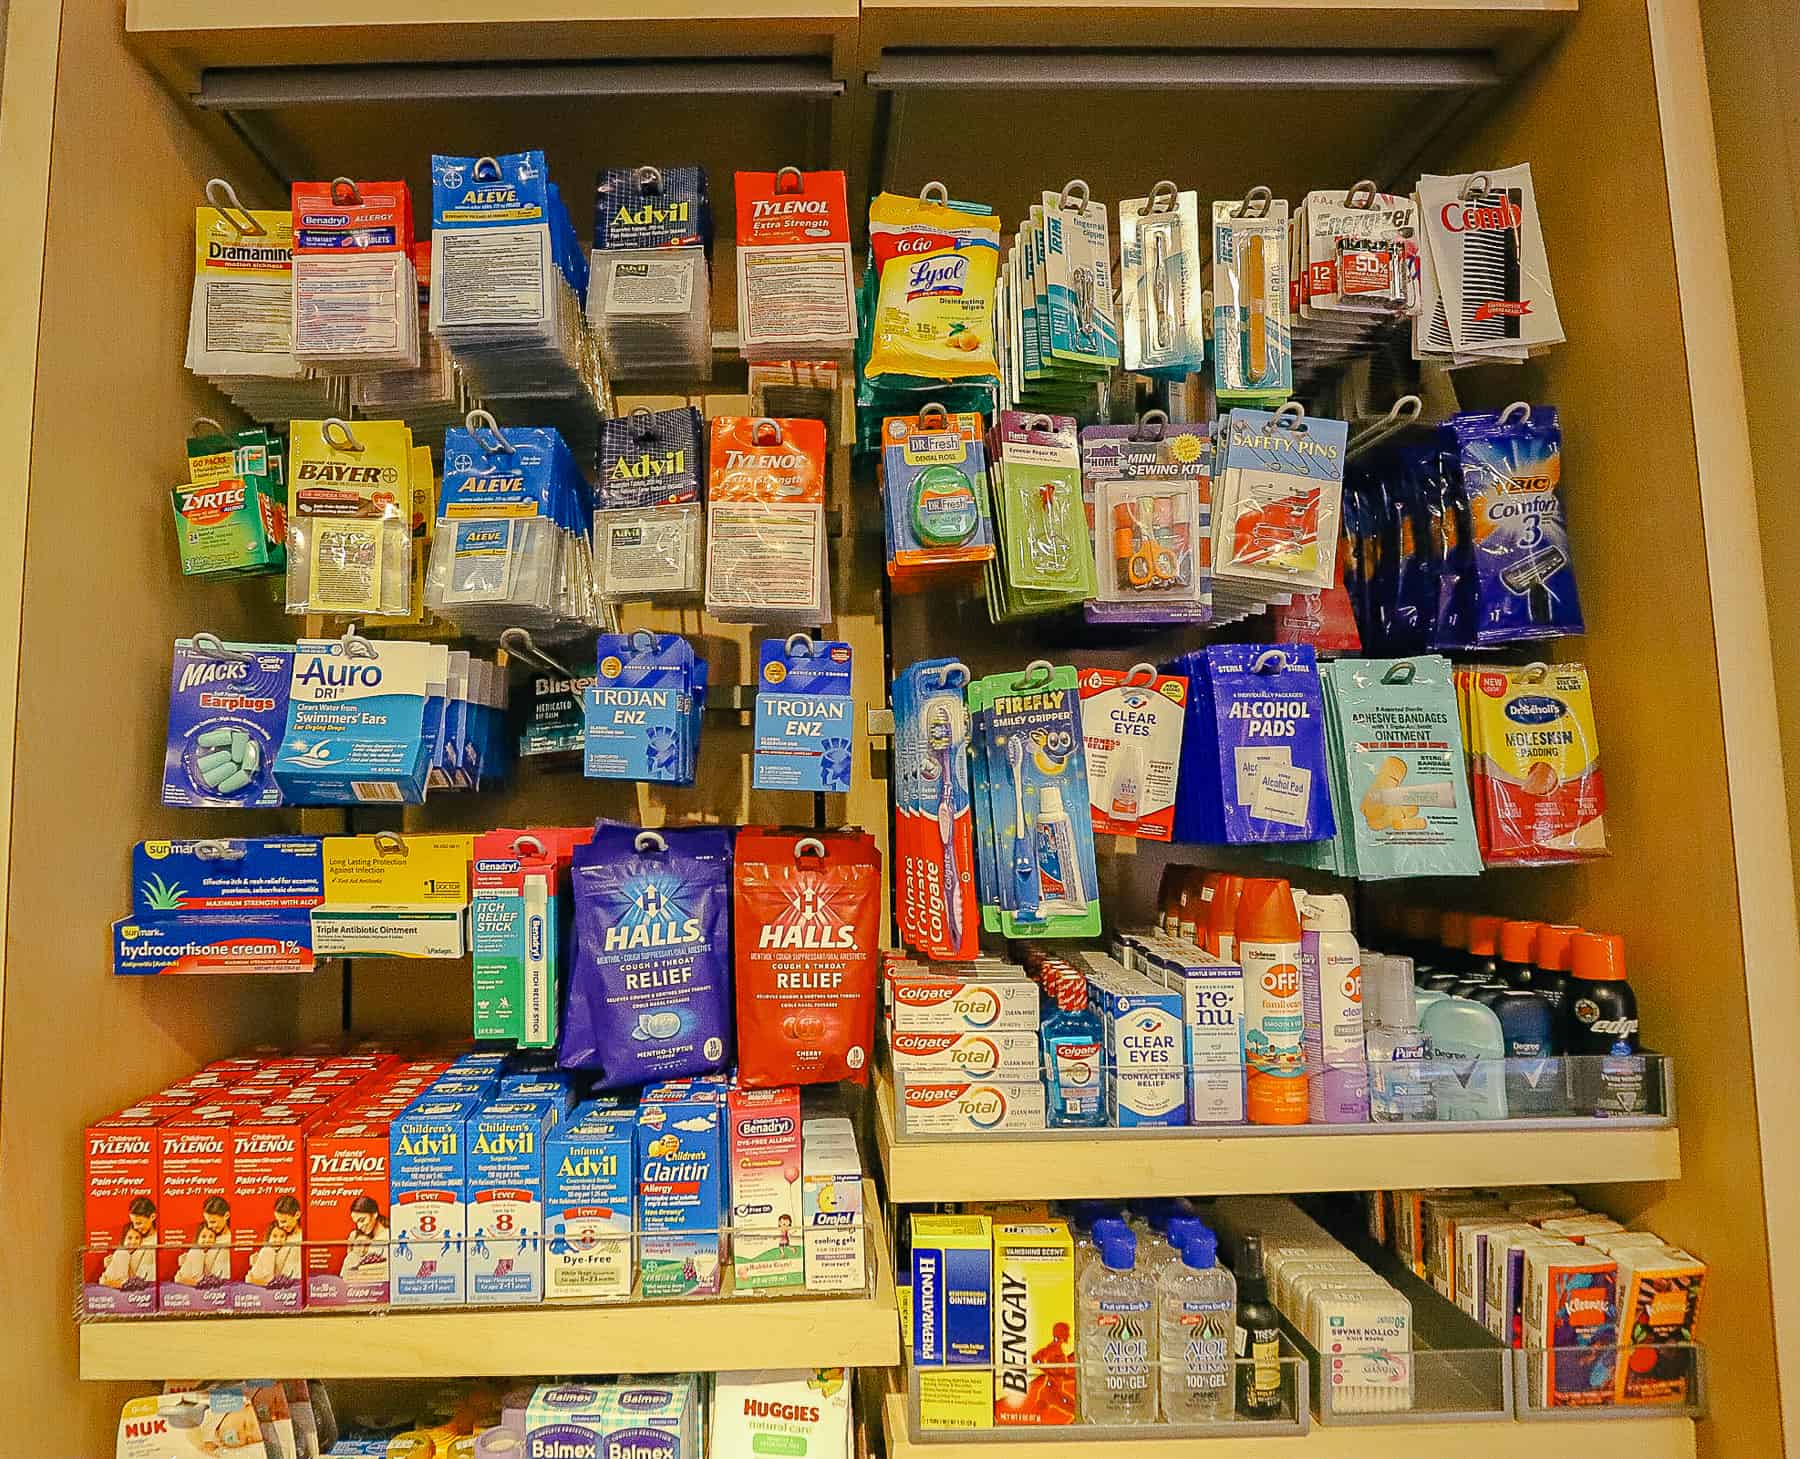 health and personal items like over-the-counter medicine